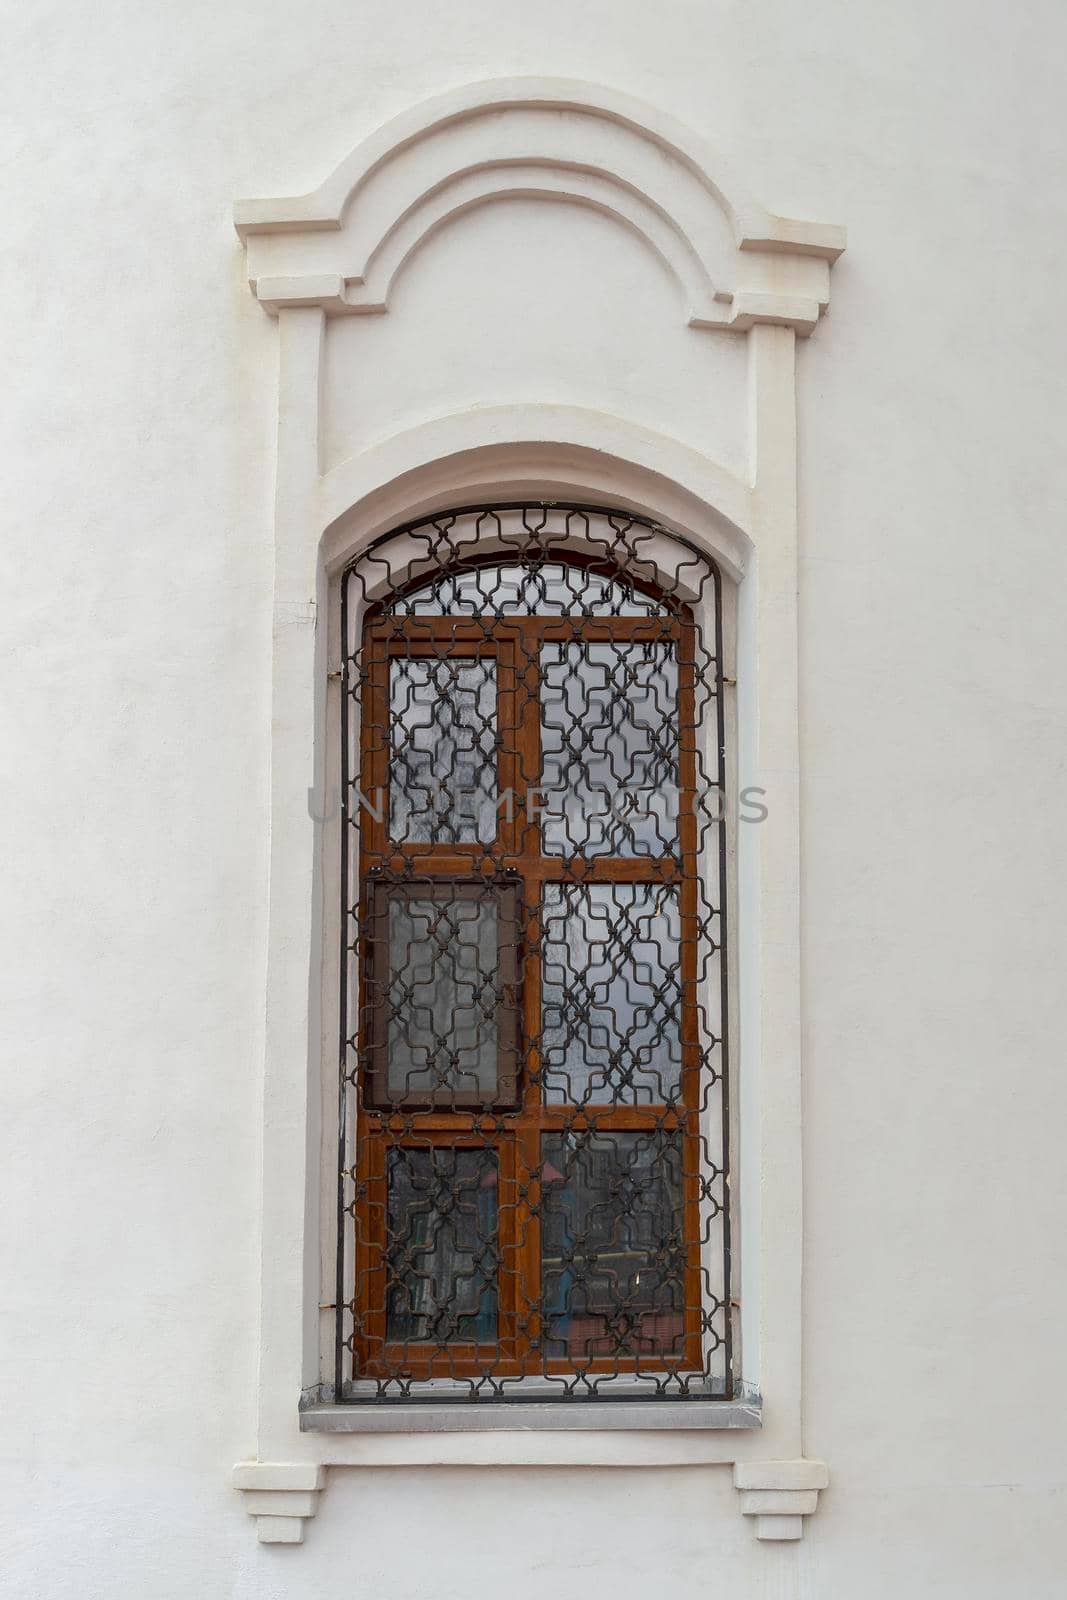 A window with a beautiful grille in the old Orthodox church. Outdoors, building fasade front view. by Essffes